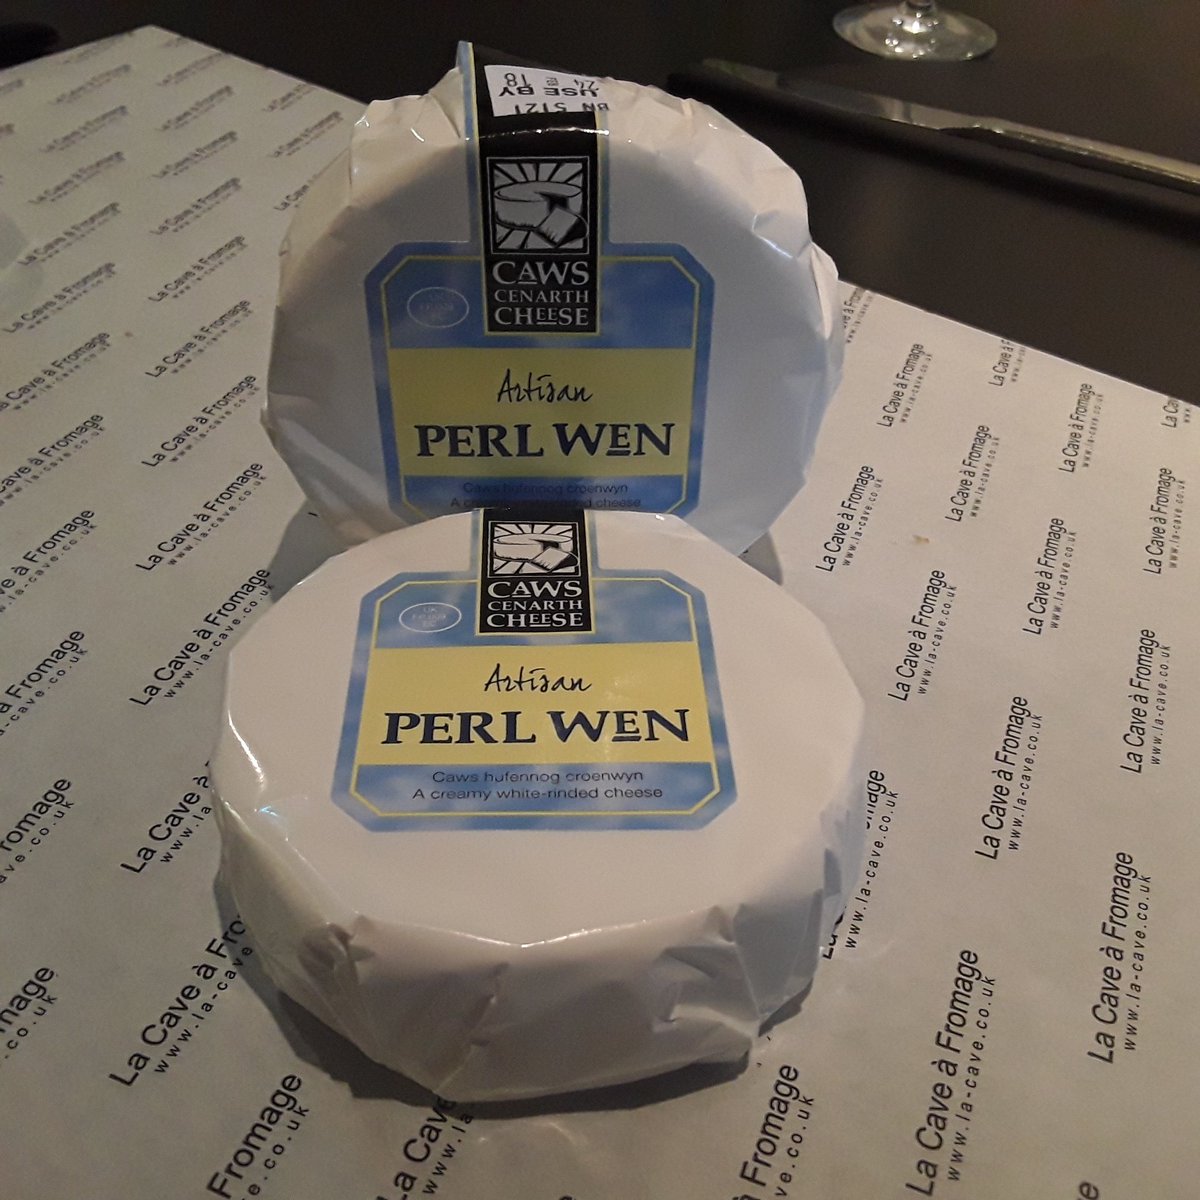 Cheese of the Week - Perl Wen - This Welsh cheese is mild and faintly lemony. As it matures, the cheese develops a brown tinge, the paste becomes richer and sweeter with a salty aftertaste. #welshcheese perfect got St David's Day #brighton #london #southken #hove